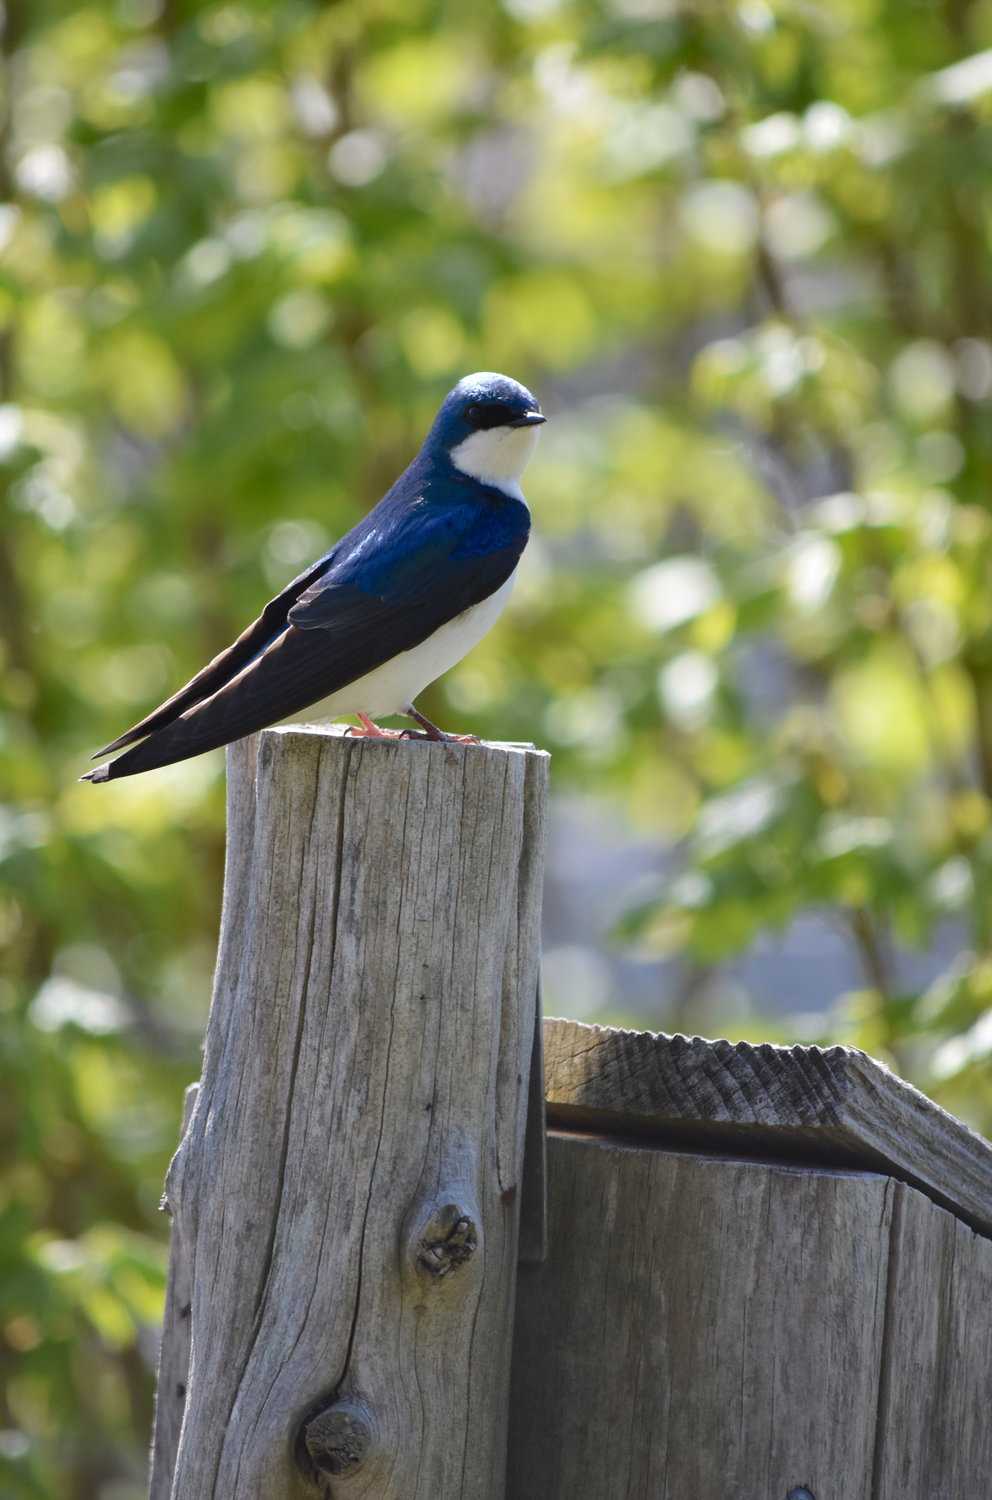 Adult male tree swallows are small songbirds with tiny black bills, deep charcoal flight feathers and black masks around the eyes. They are characterized by brilliant blue feathers above and white feathers below.